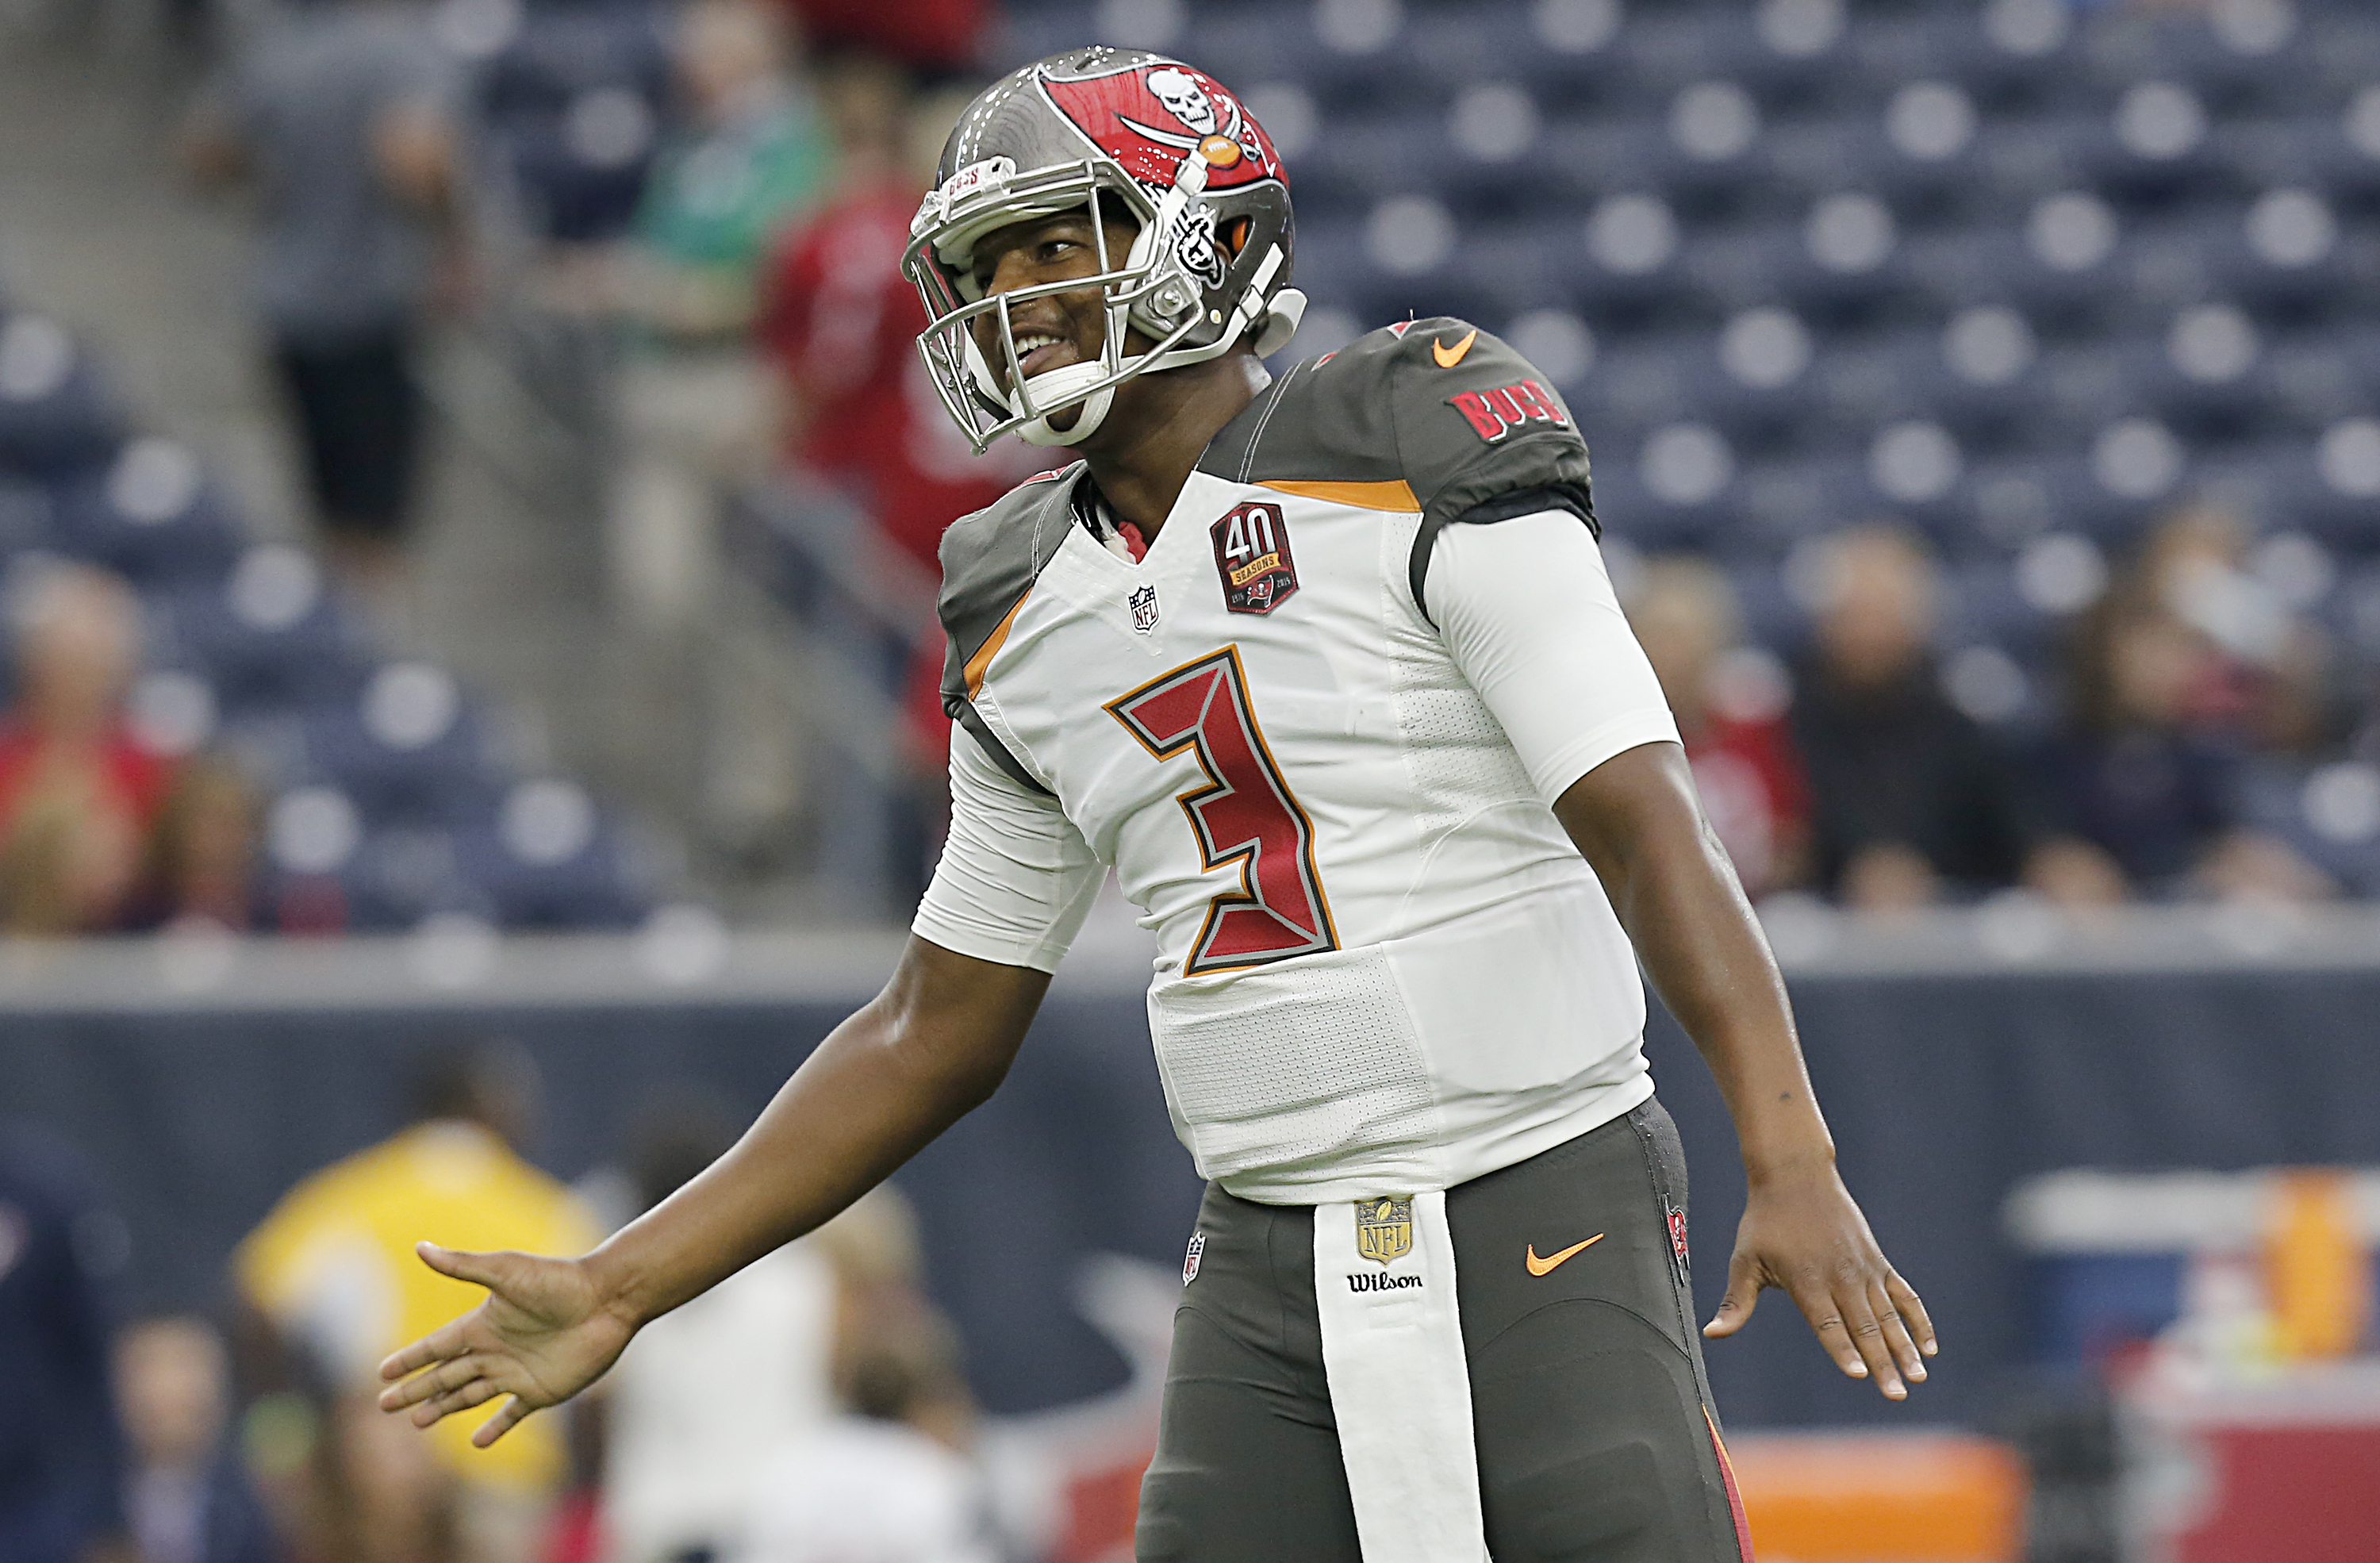 Winston has been shaky but has his team up at halftime (Getty).